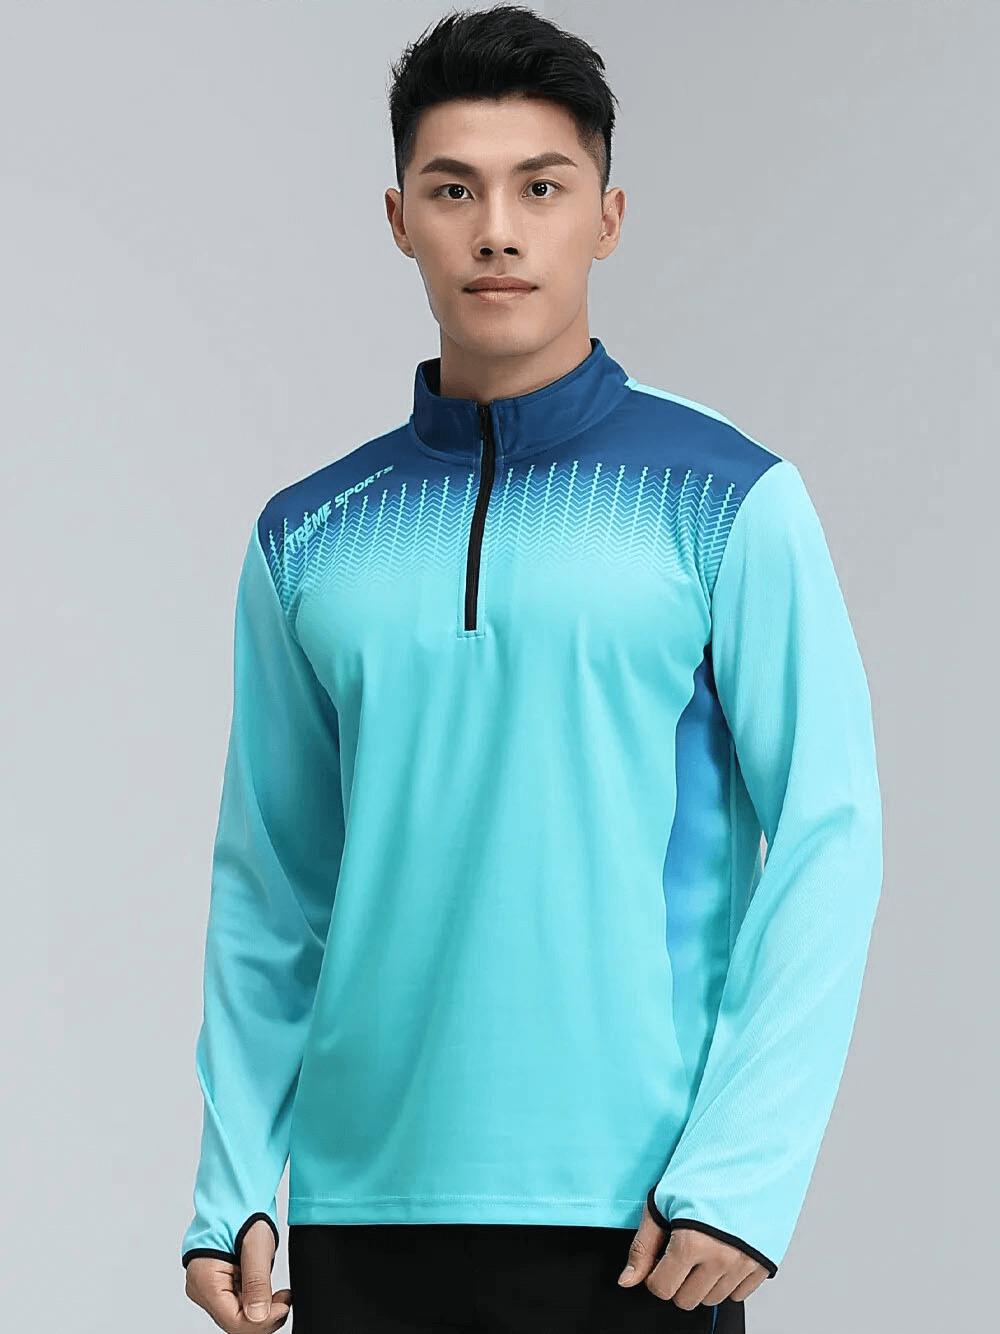 Running Half Zip Stand Collar Top with Finger Hole - SF1558